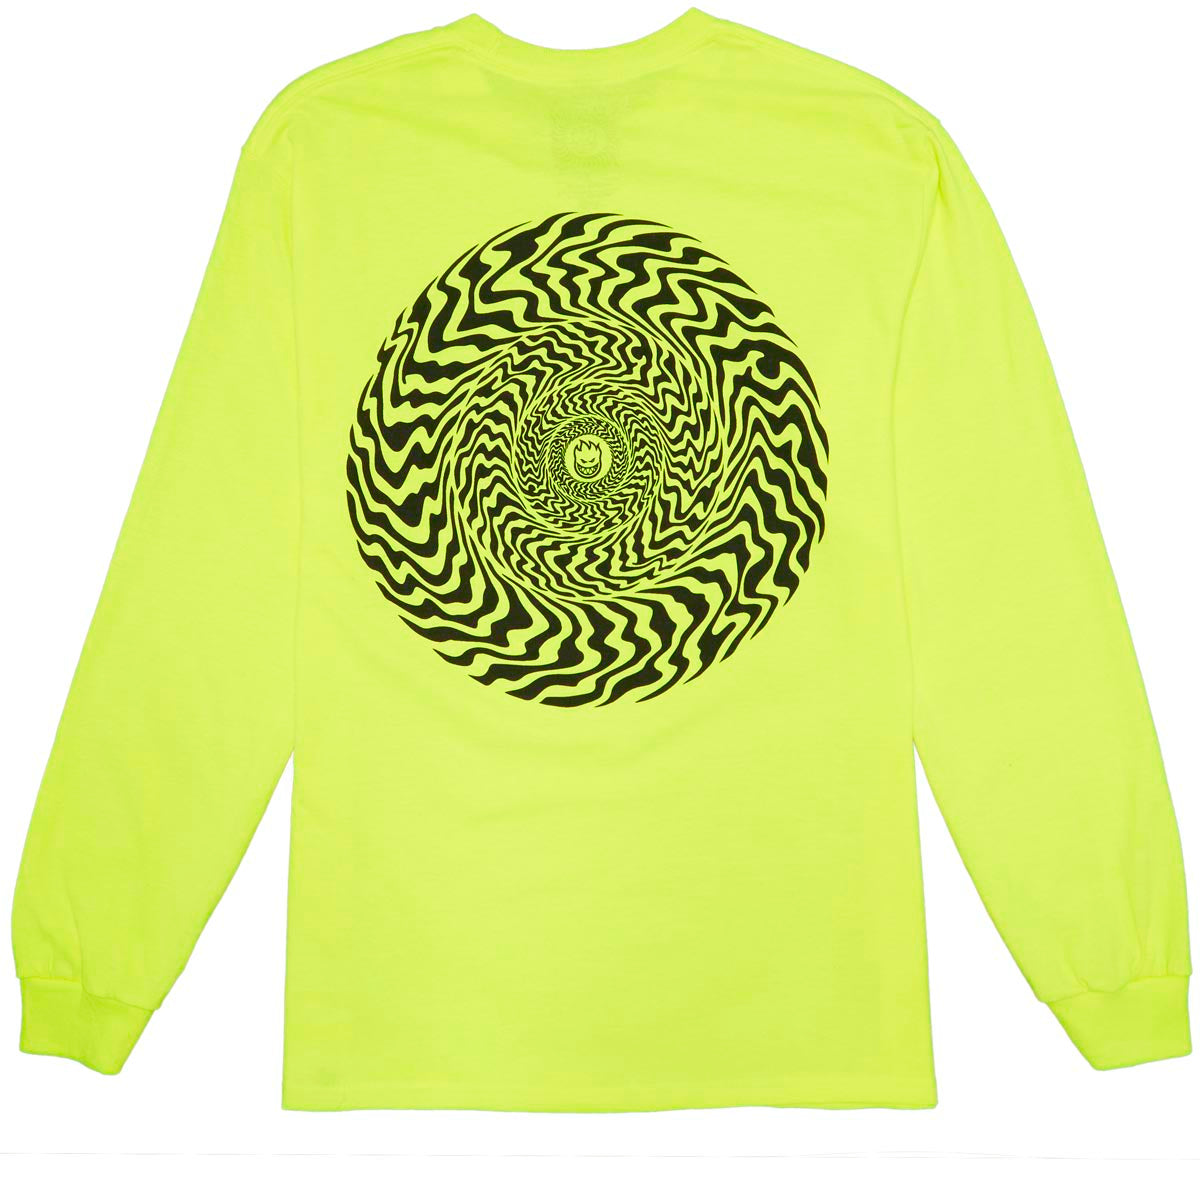 Spitfire Swirled Classic Long Sleeve T-Shirt - Safety Green/Black image 1